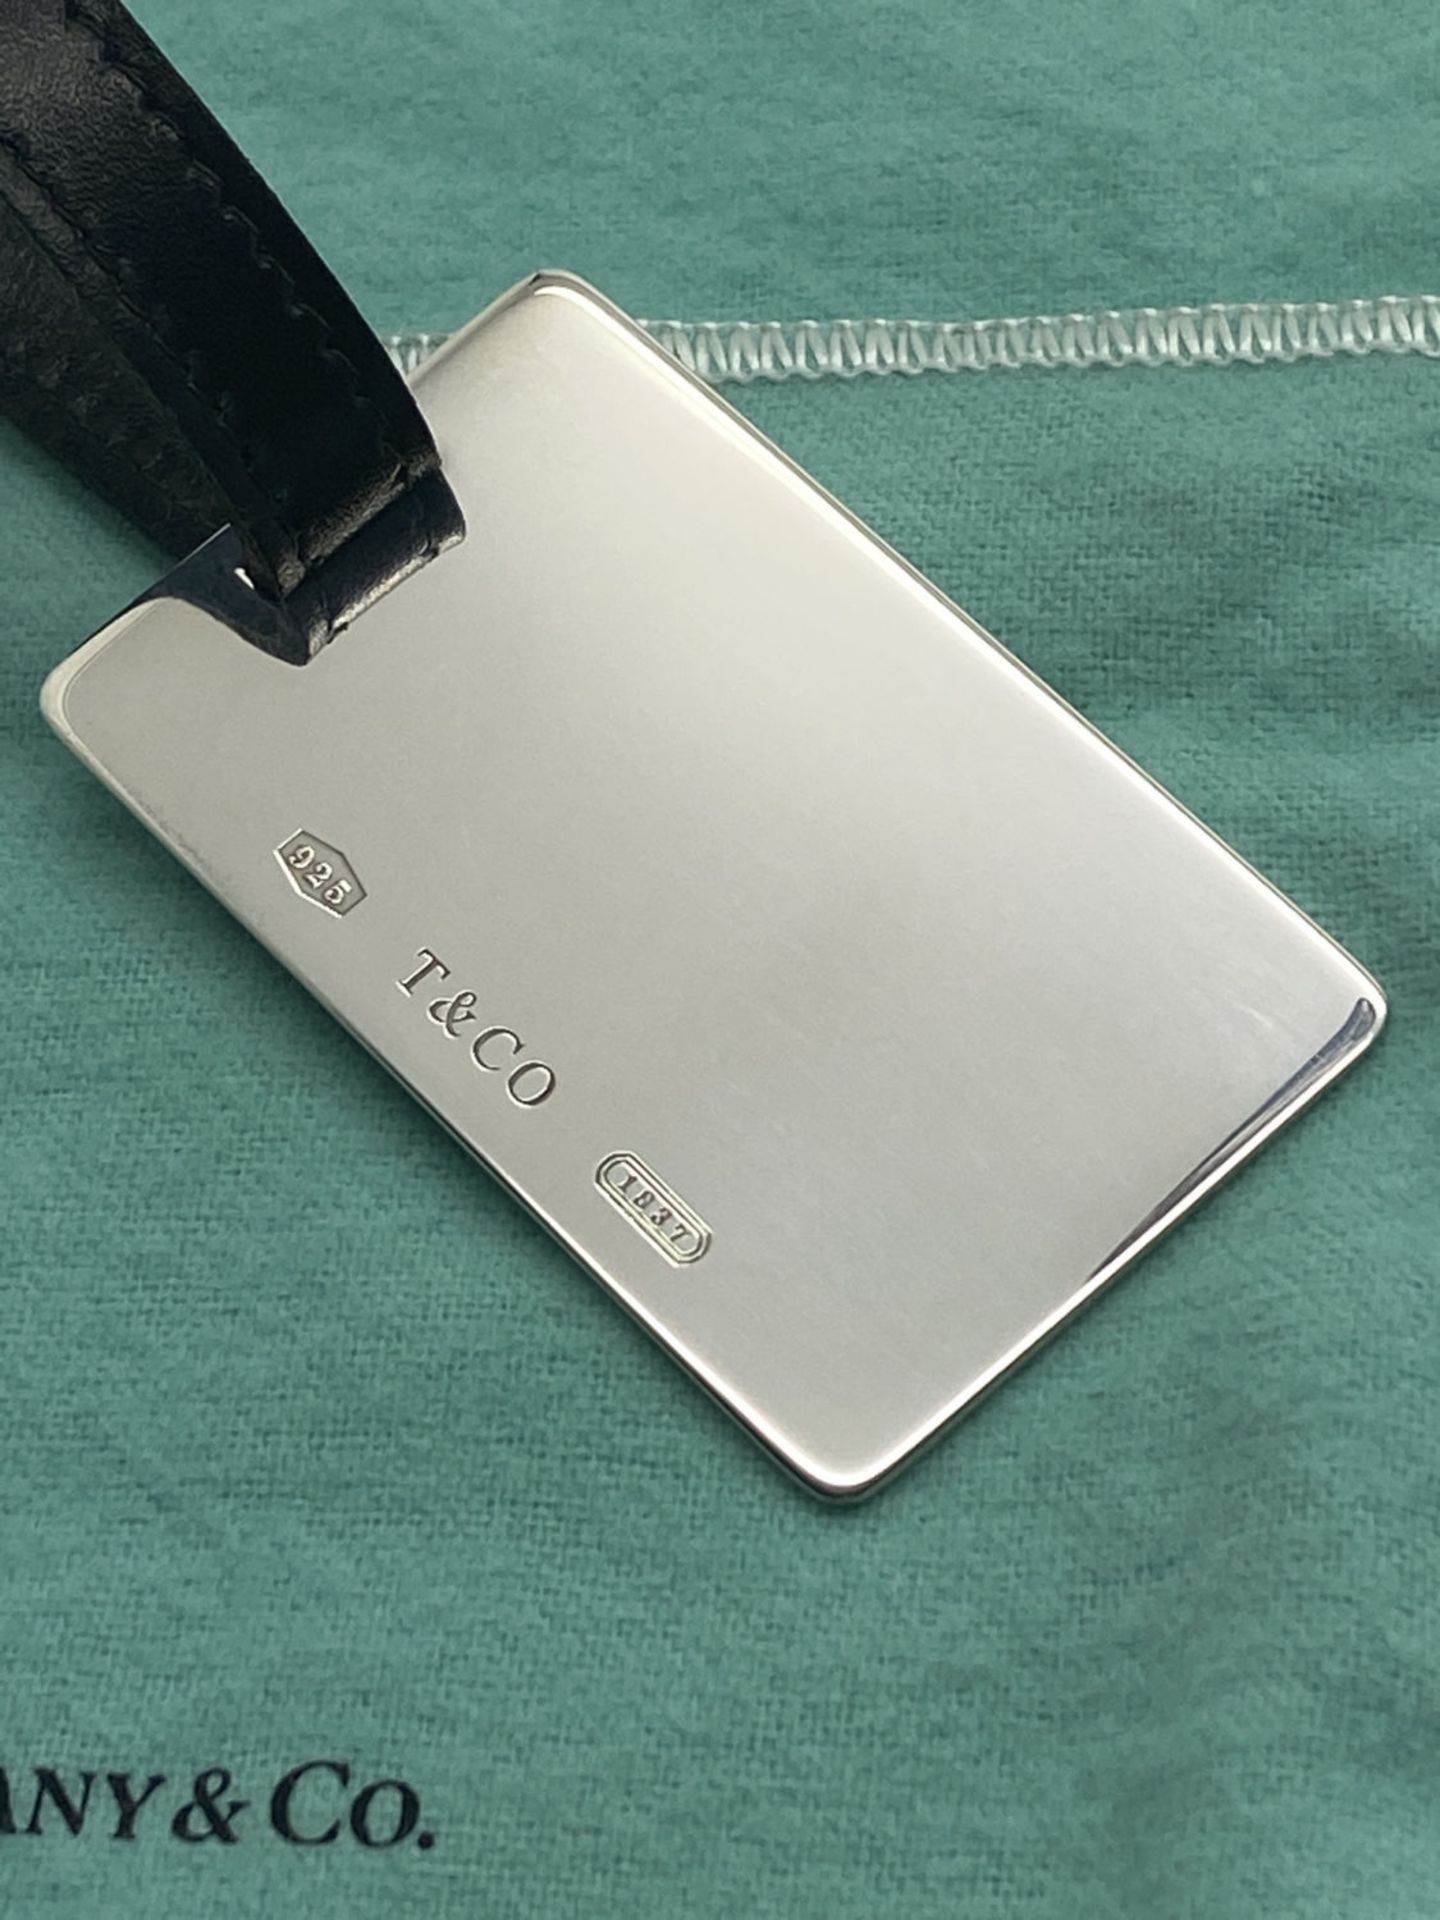 TIFFANY & CO 925 SILVER LUGGAGE TAG IN EXCELLENT CONDITION WITH TIFFANY POUCH - Image 2 of 4